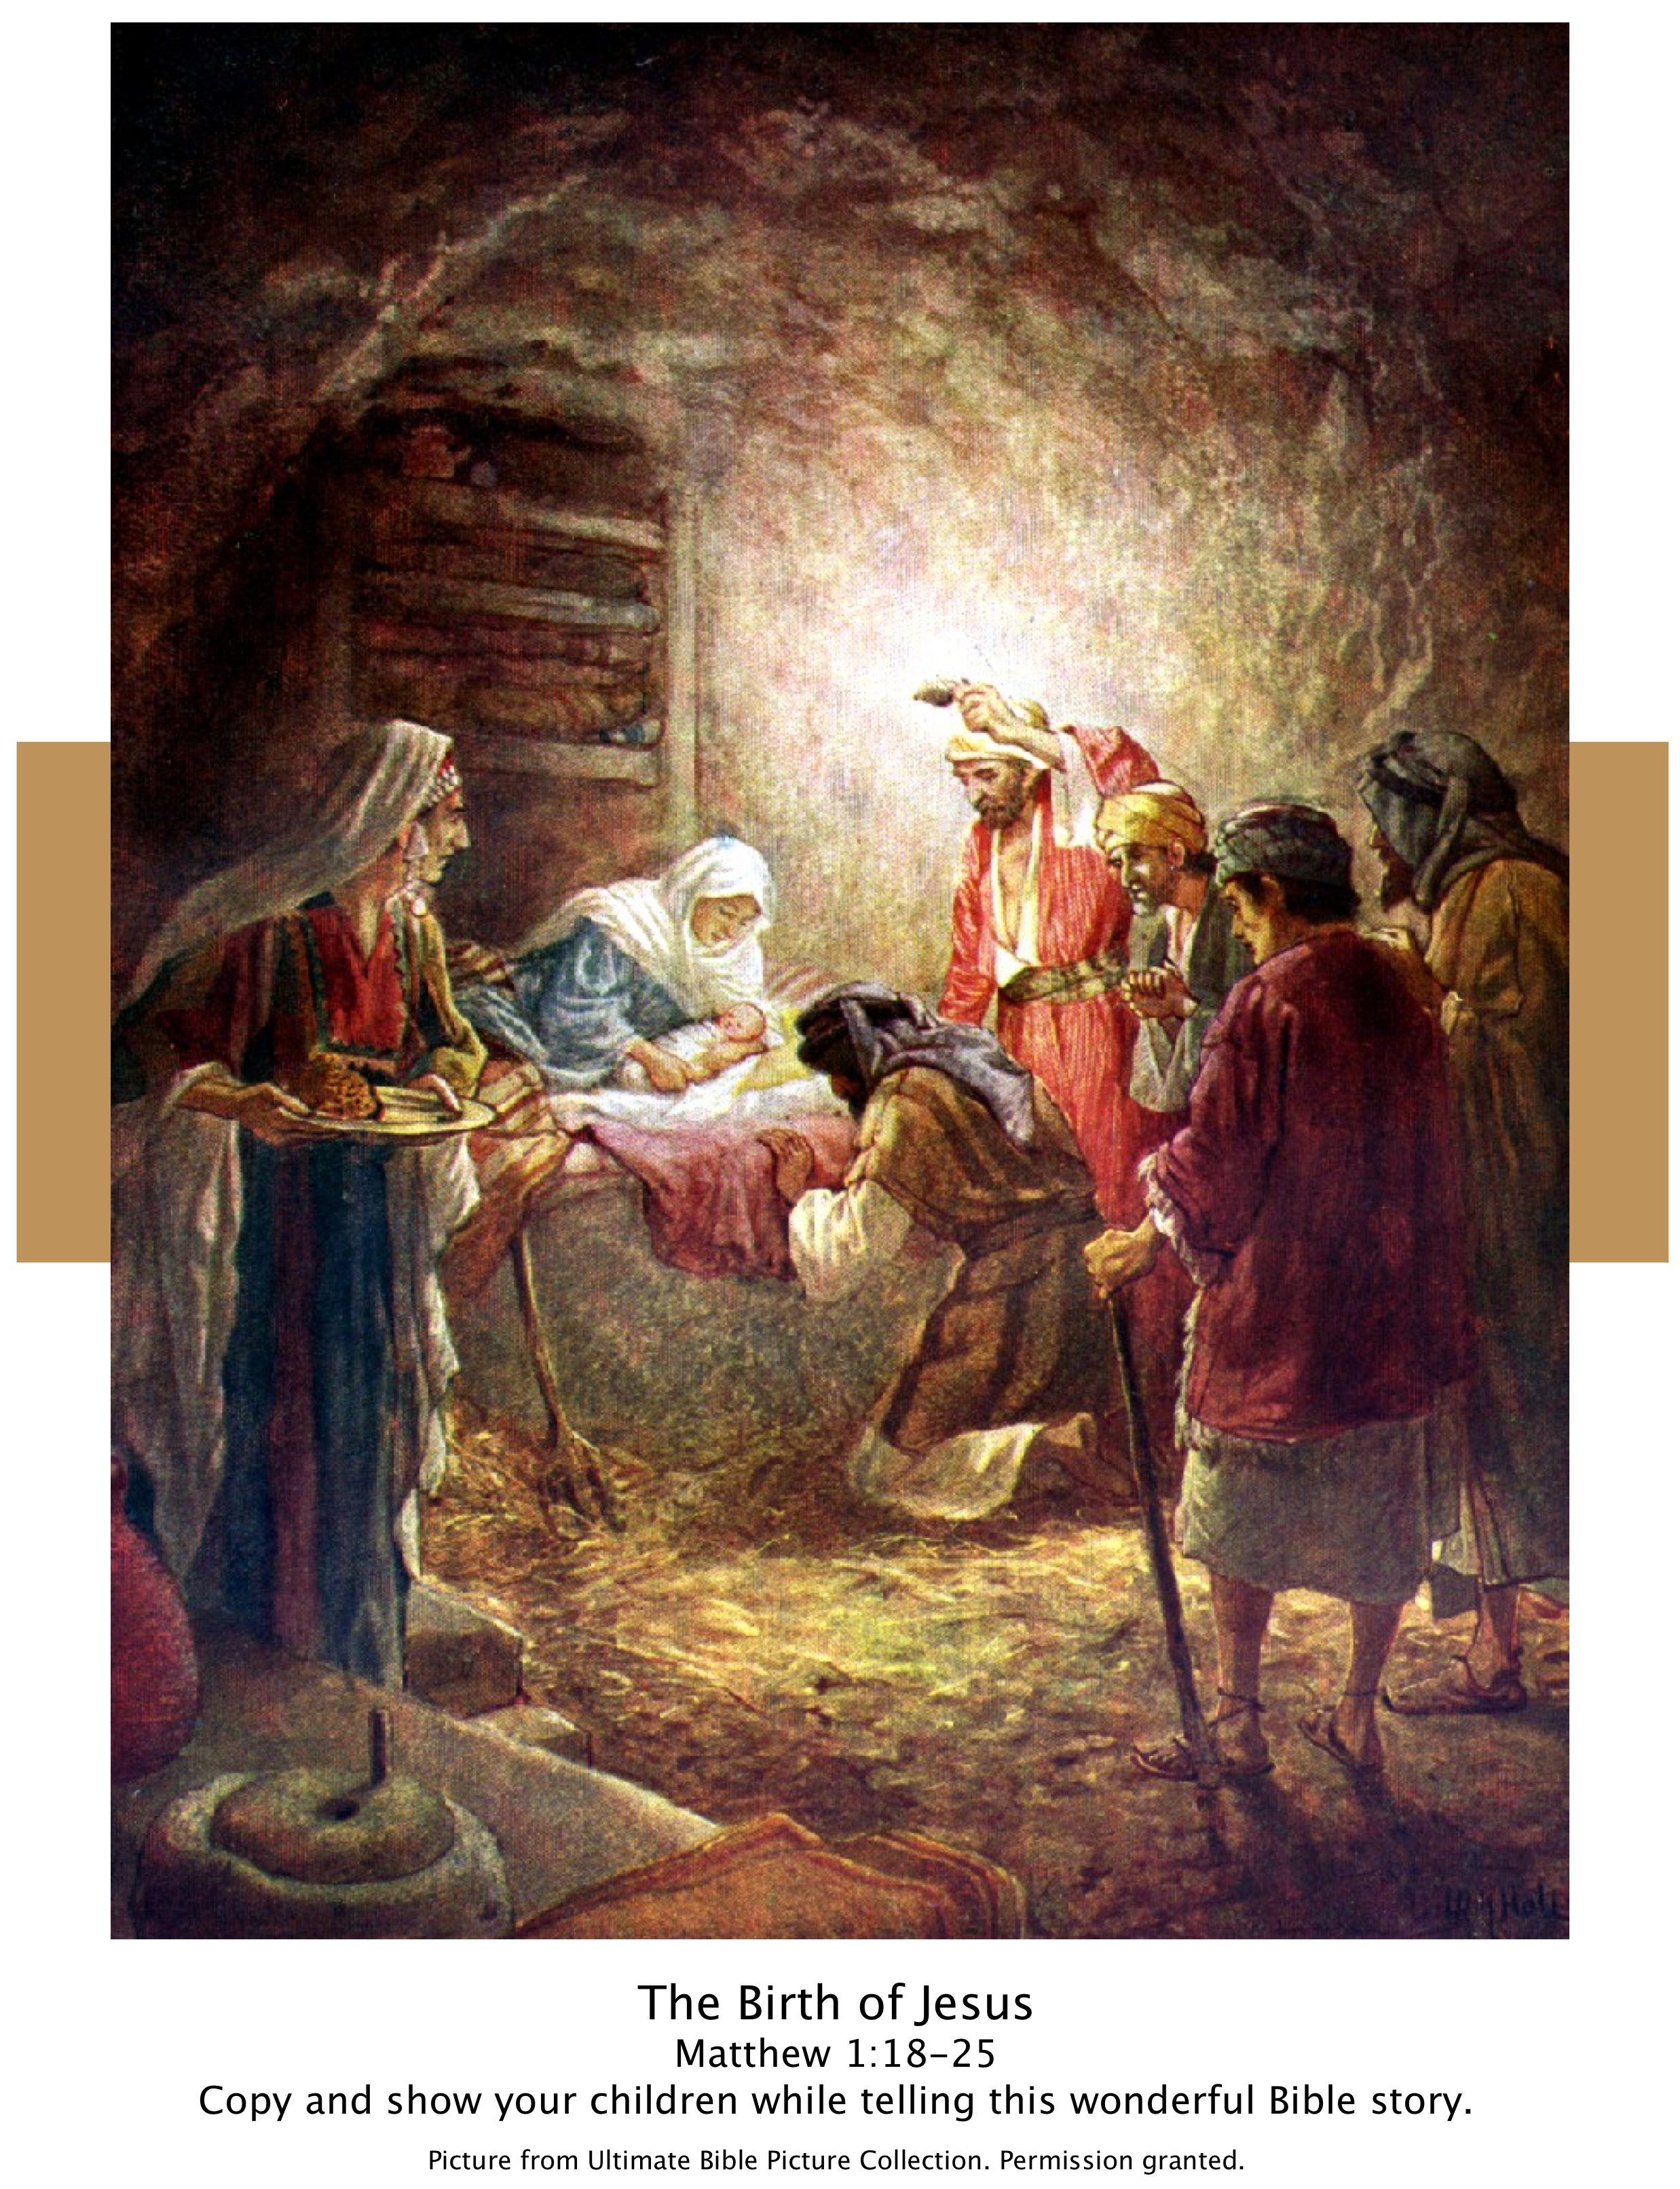 Bible Story Picture Of The Birth Of Jesus From Matthew 1:18 25